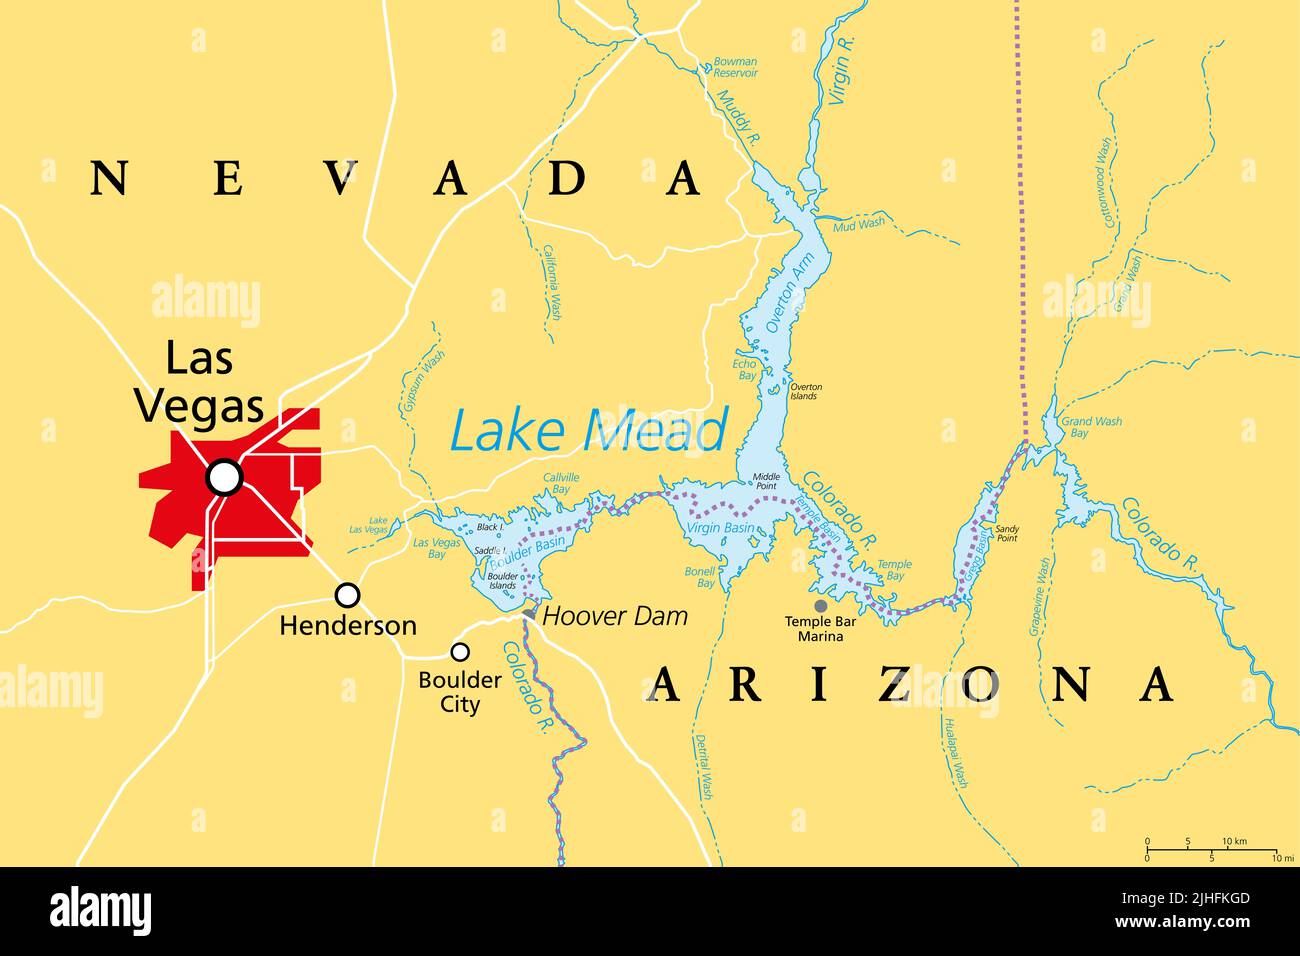 Las Vegas and Lake Mead, political map. Vegas, most populous city in Nevada, known primarily for its gambling and entertainment, left of Lake Mead. Stock Photo